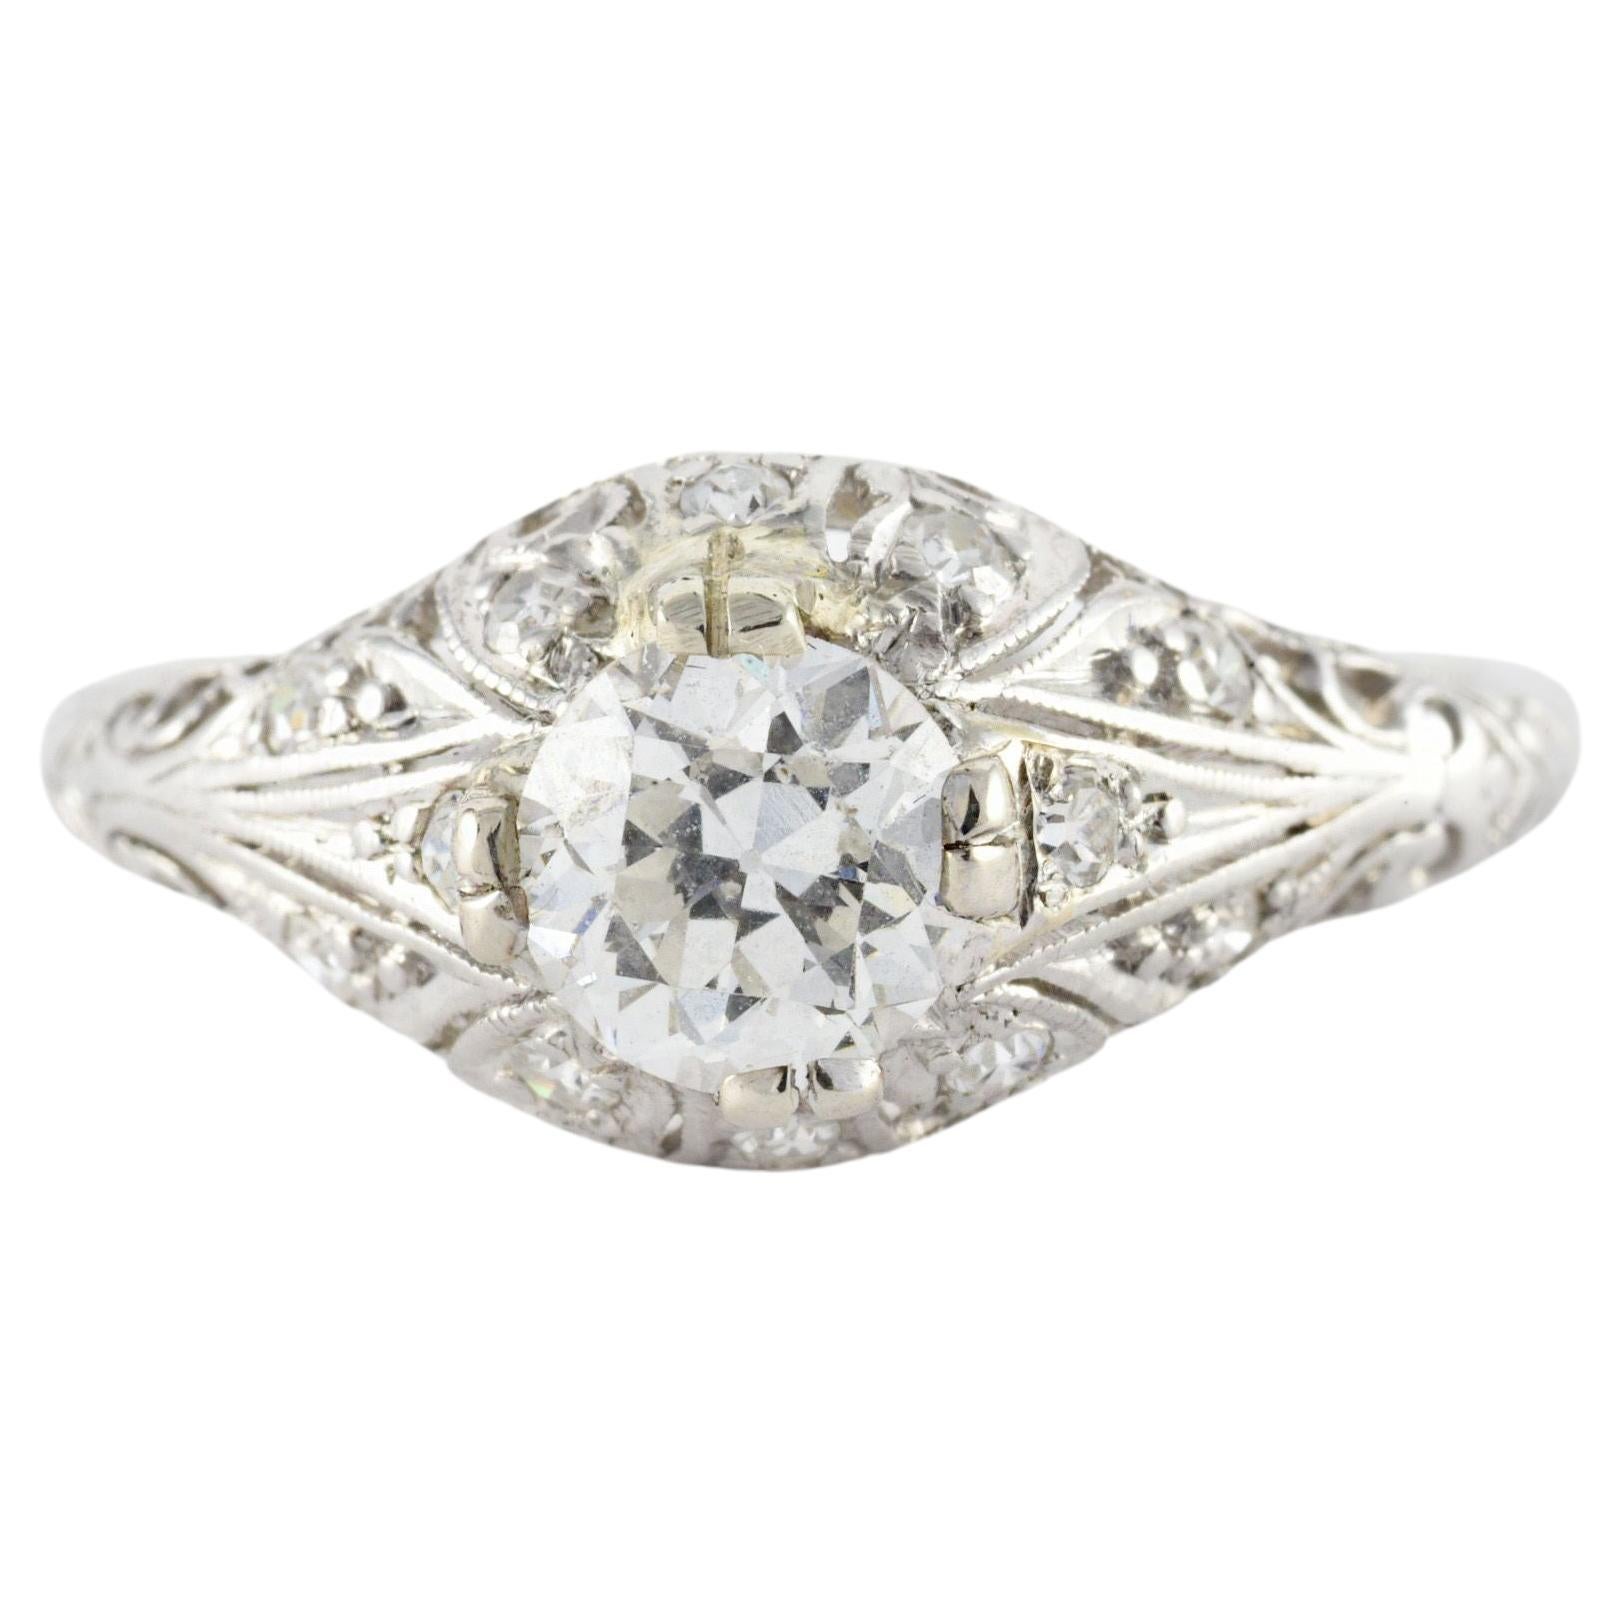 Crafted in the 1920s from platinum, this Art Deco gem features an intricate filigree dome crowned with a bold Old European cut diamond measuring approximately 0.76 carats, F color, VS2 clarity and accented with eleven small single cut diamonds